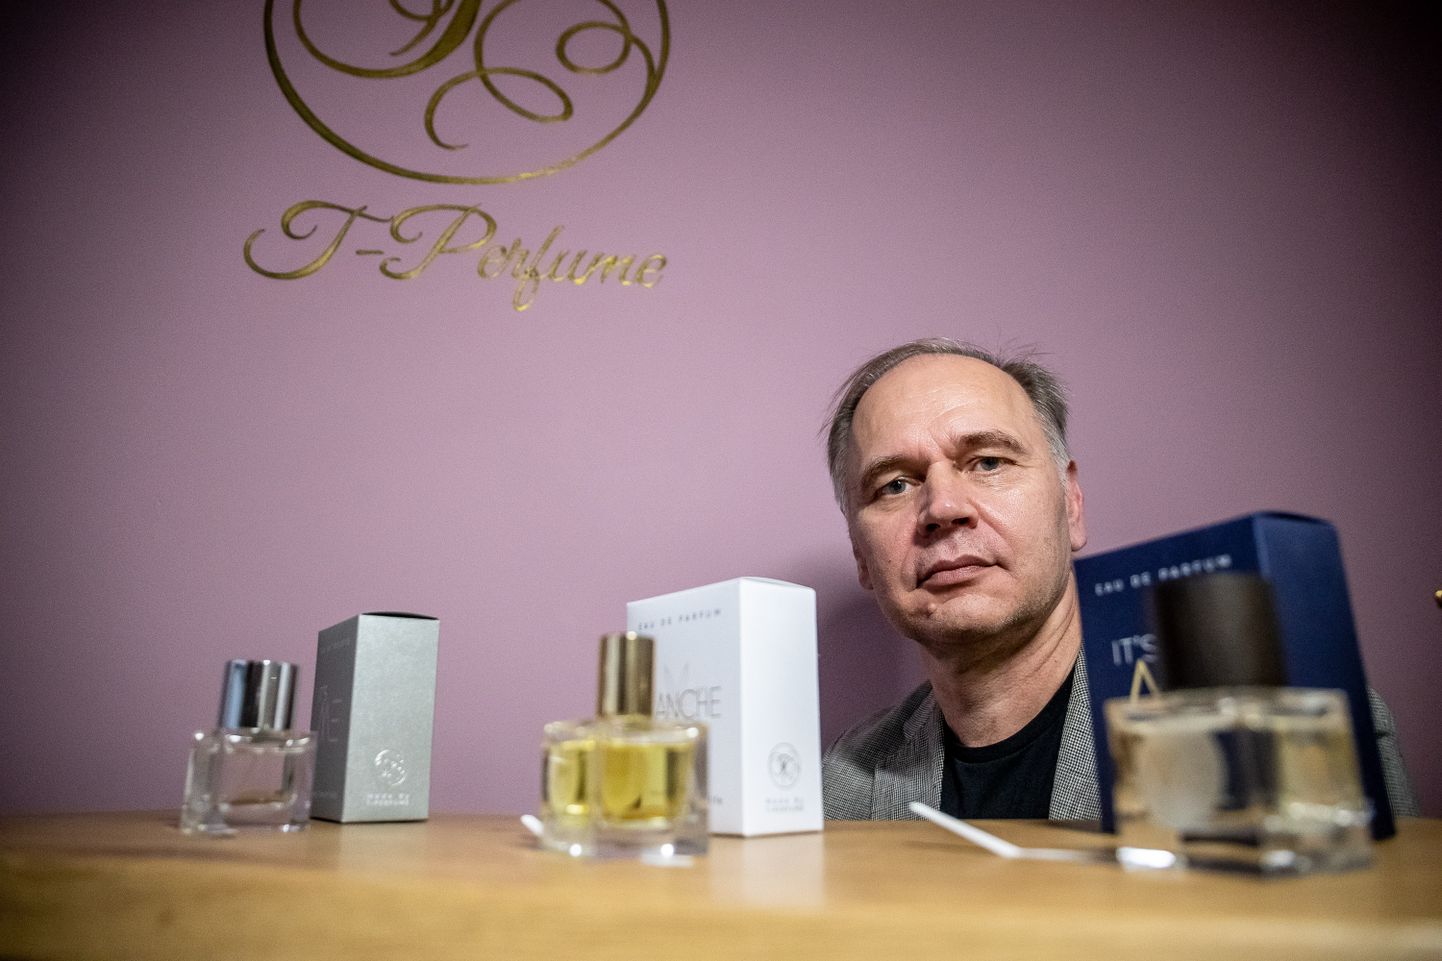 «In the typically Estonian way I chose the hardest path and started to create my own brand of perfume – T-Perfume,» Veiler said.